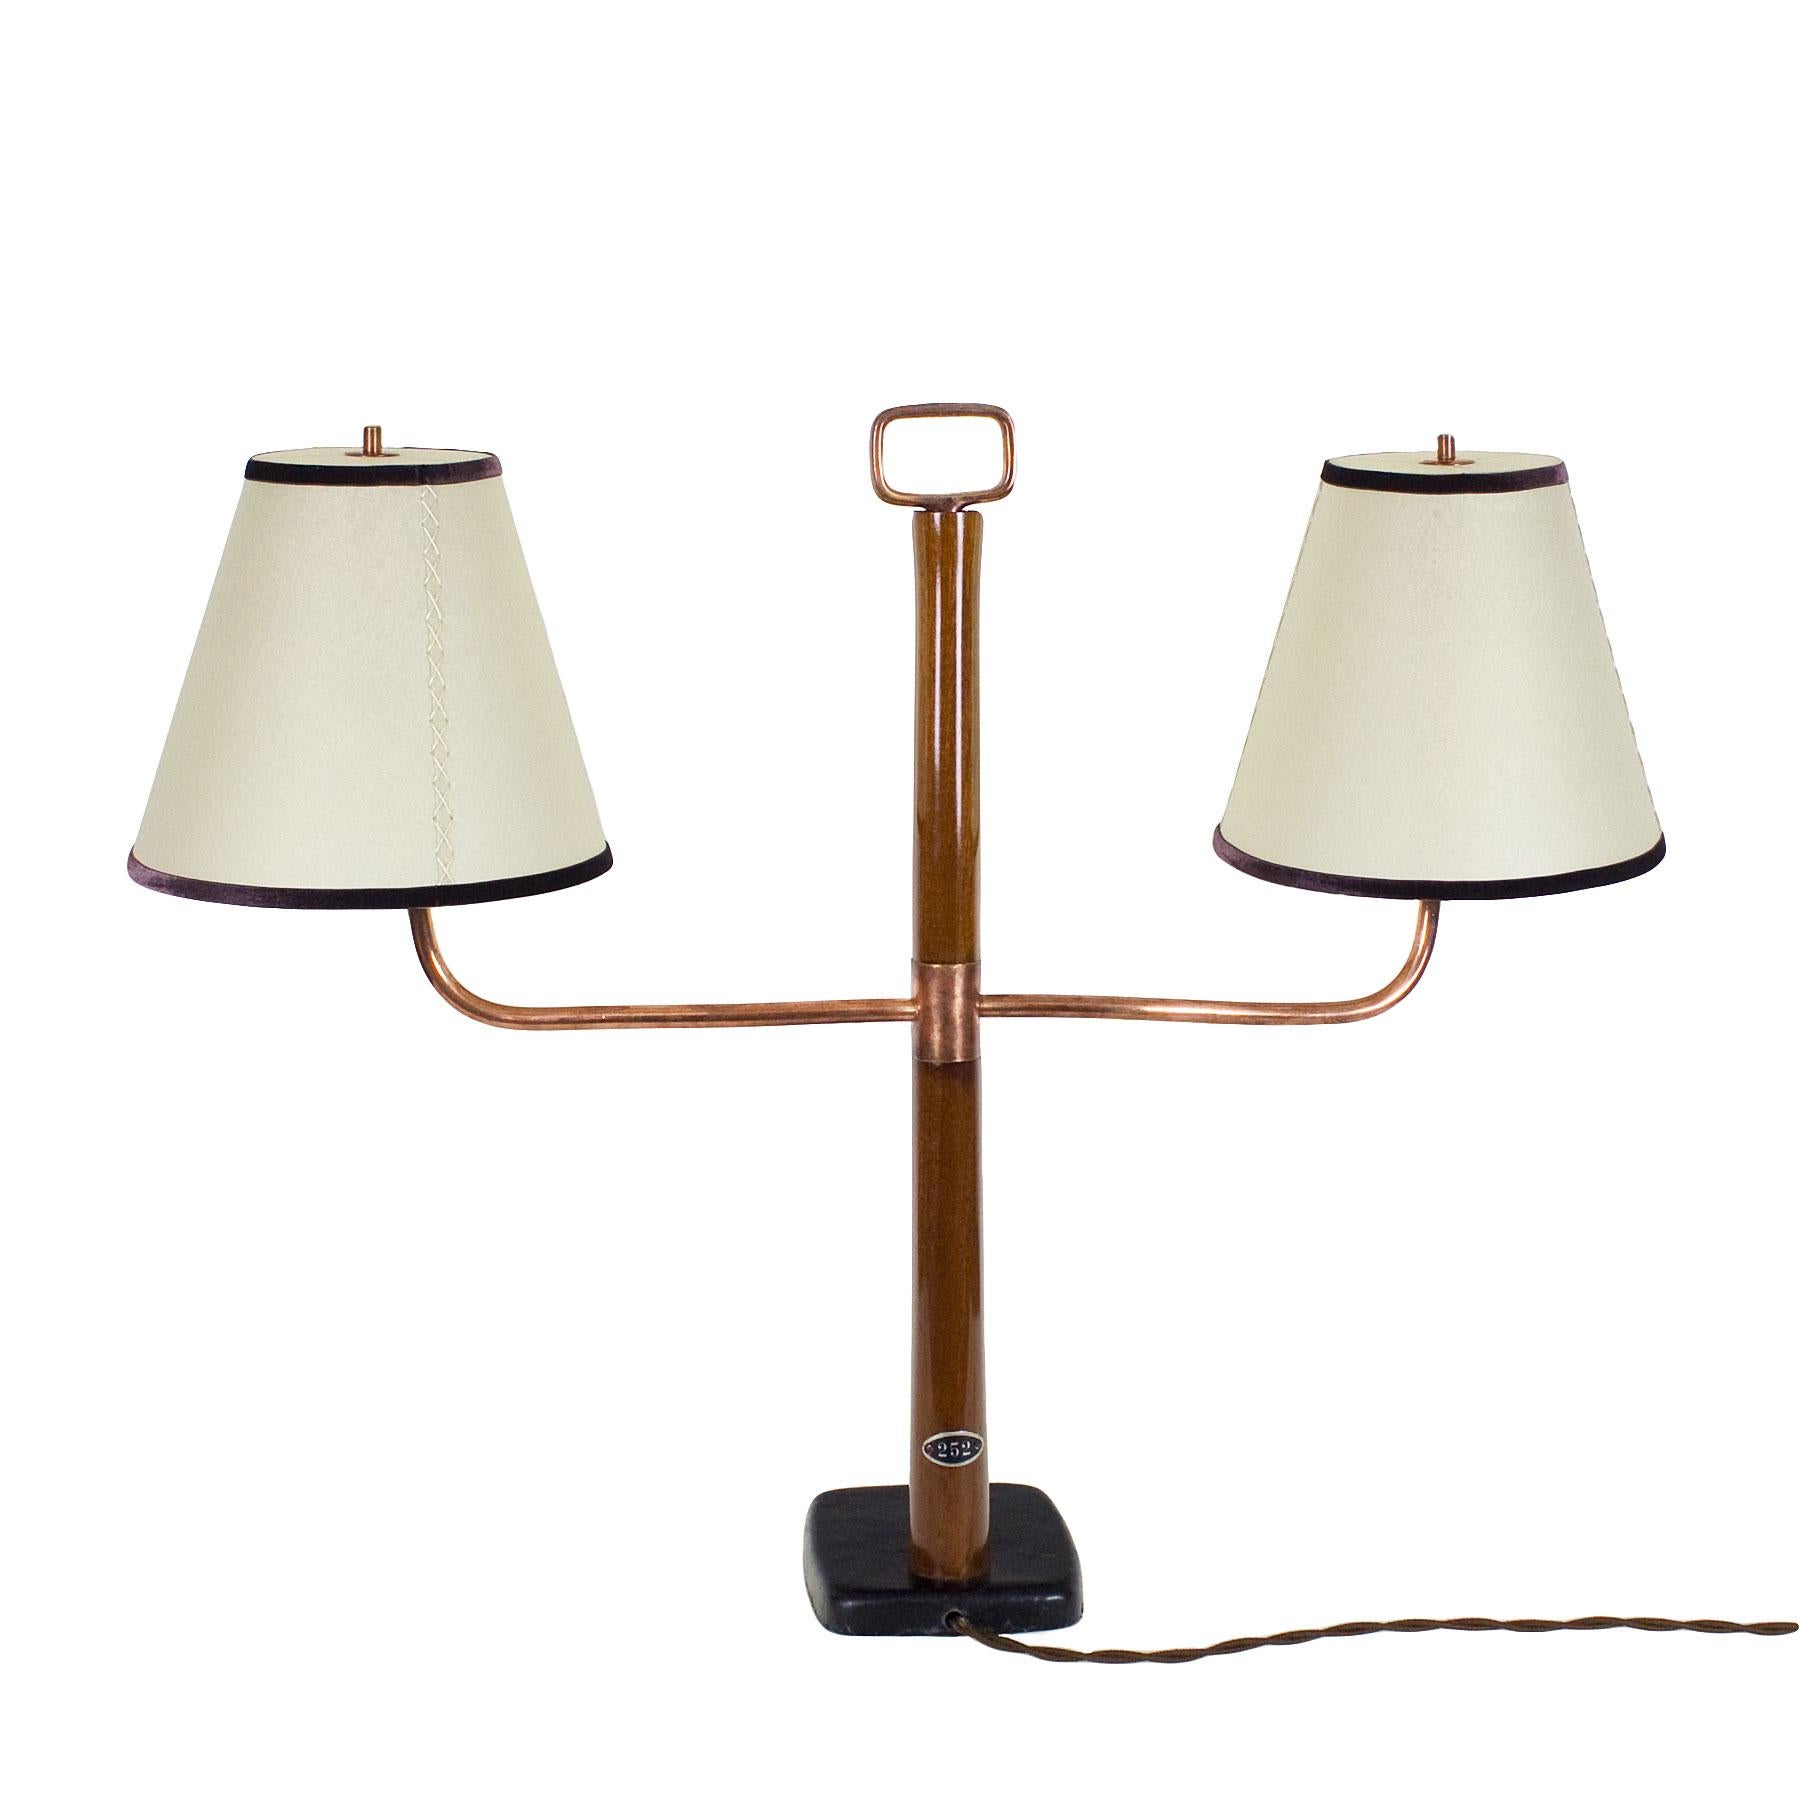 1930s Art Deco Library Table Lamp, Mahogany, Steel, Leather, Parchment, Italy (Französisch)